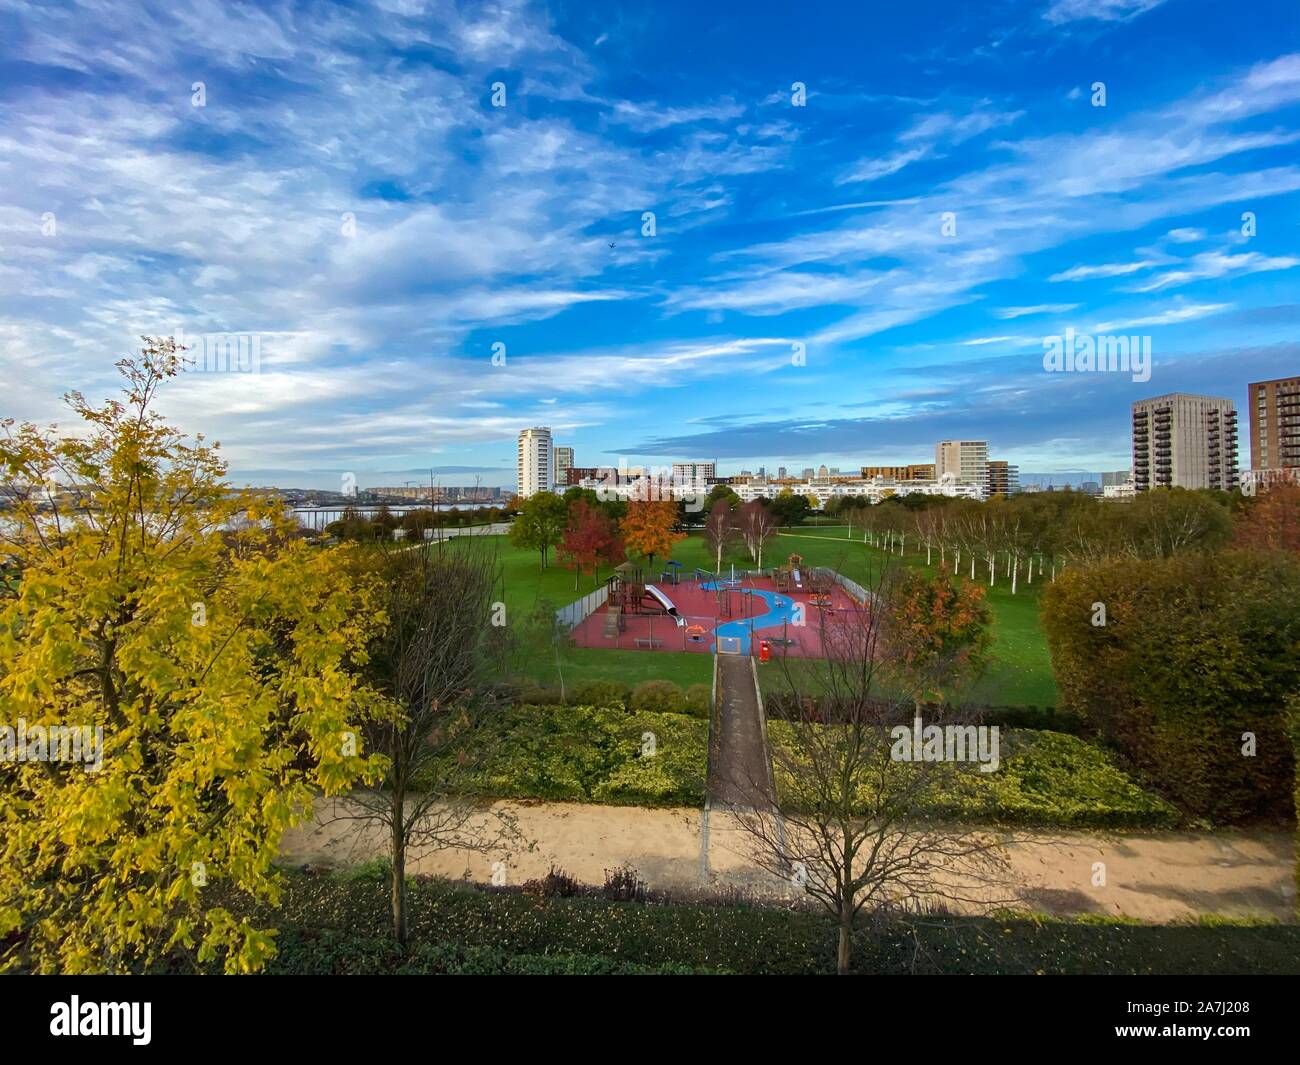 Silvertown, London, UK. 3rd Nov, 2019. UK Weather: Cloudy morning in Silvertown London. Thames barrier park is fairly deserted as the sun rises with dry morning expcted. Sunshine and clouds with with some blue skies expected Credit: WansfordPhoto/Alamy Live News Stock Photo